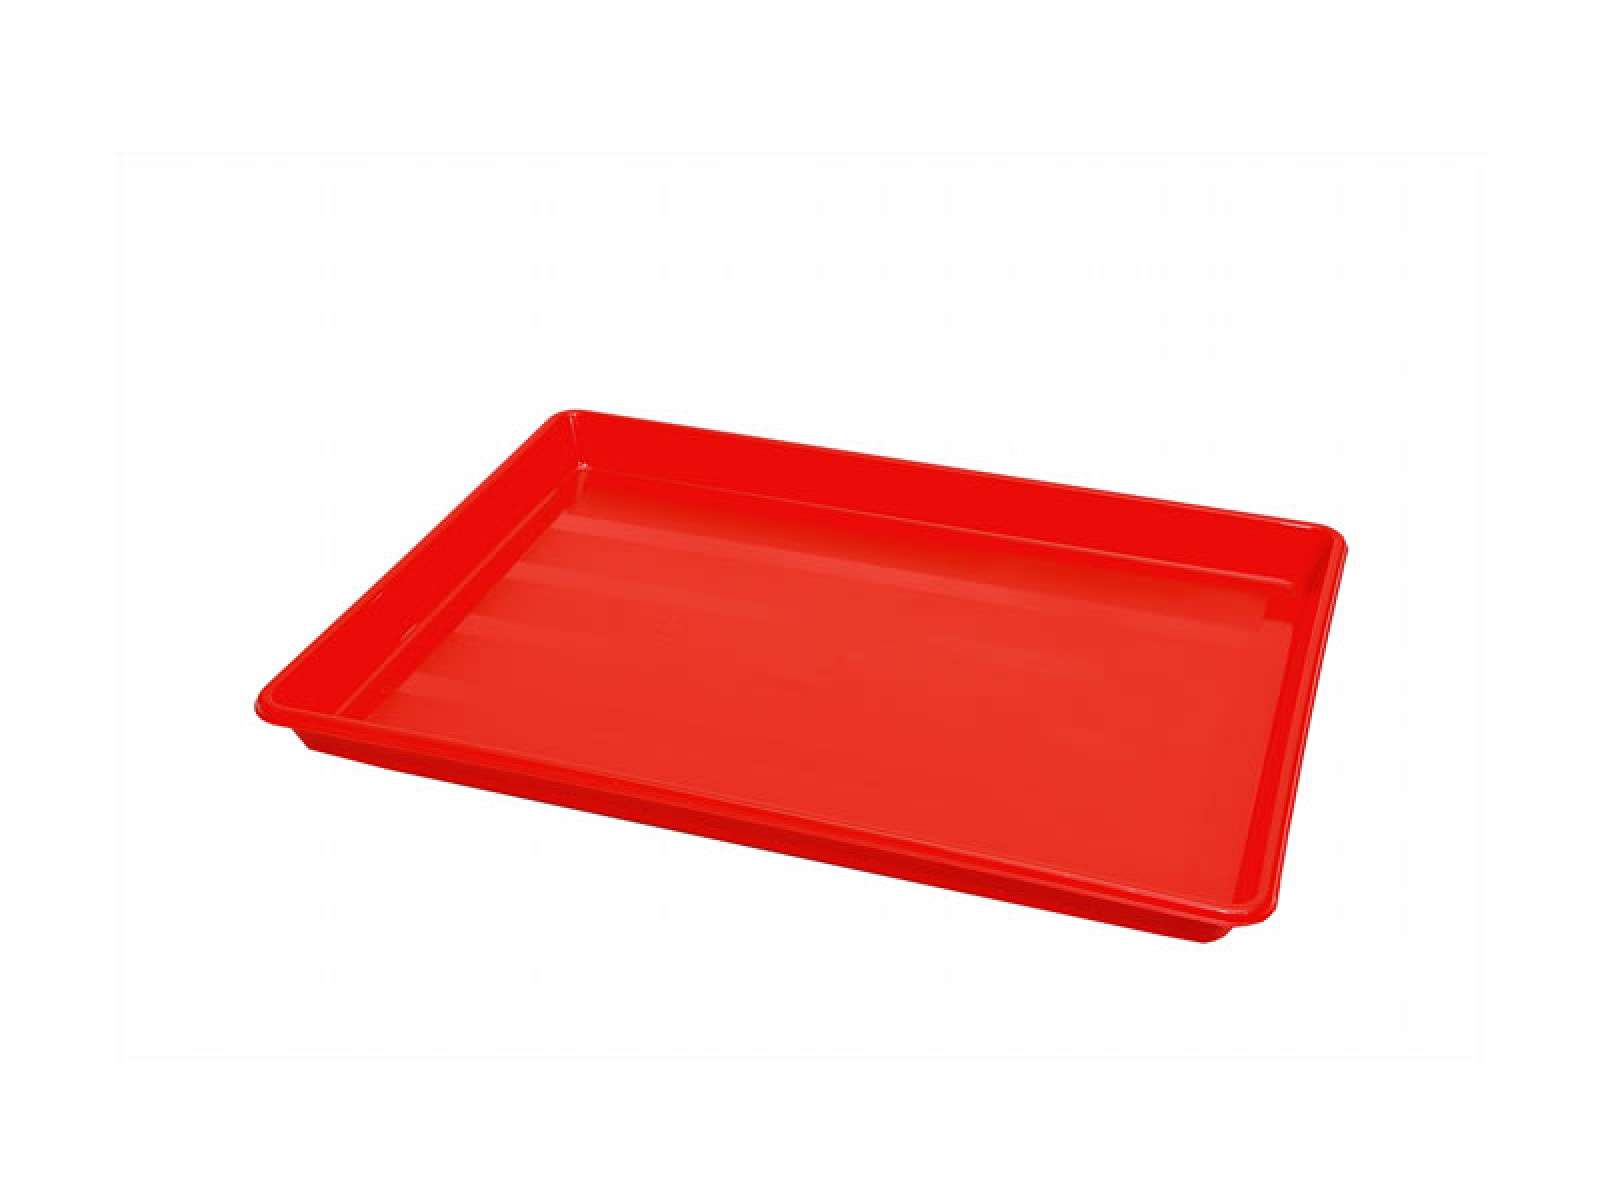 Square Tray with Stripes pattern